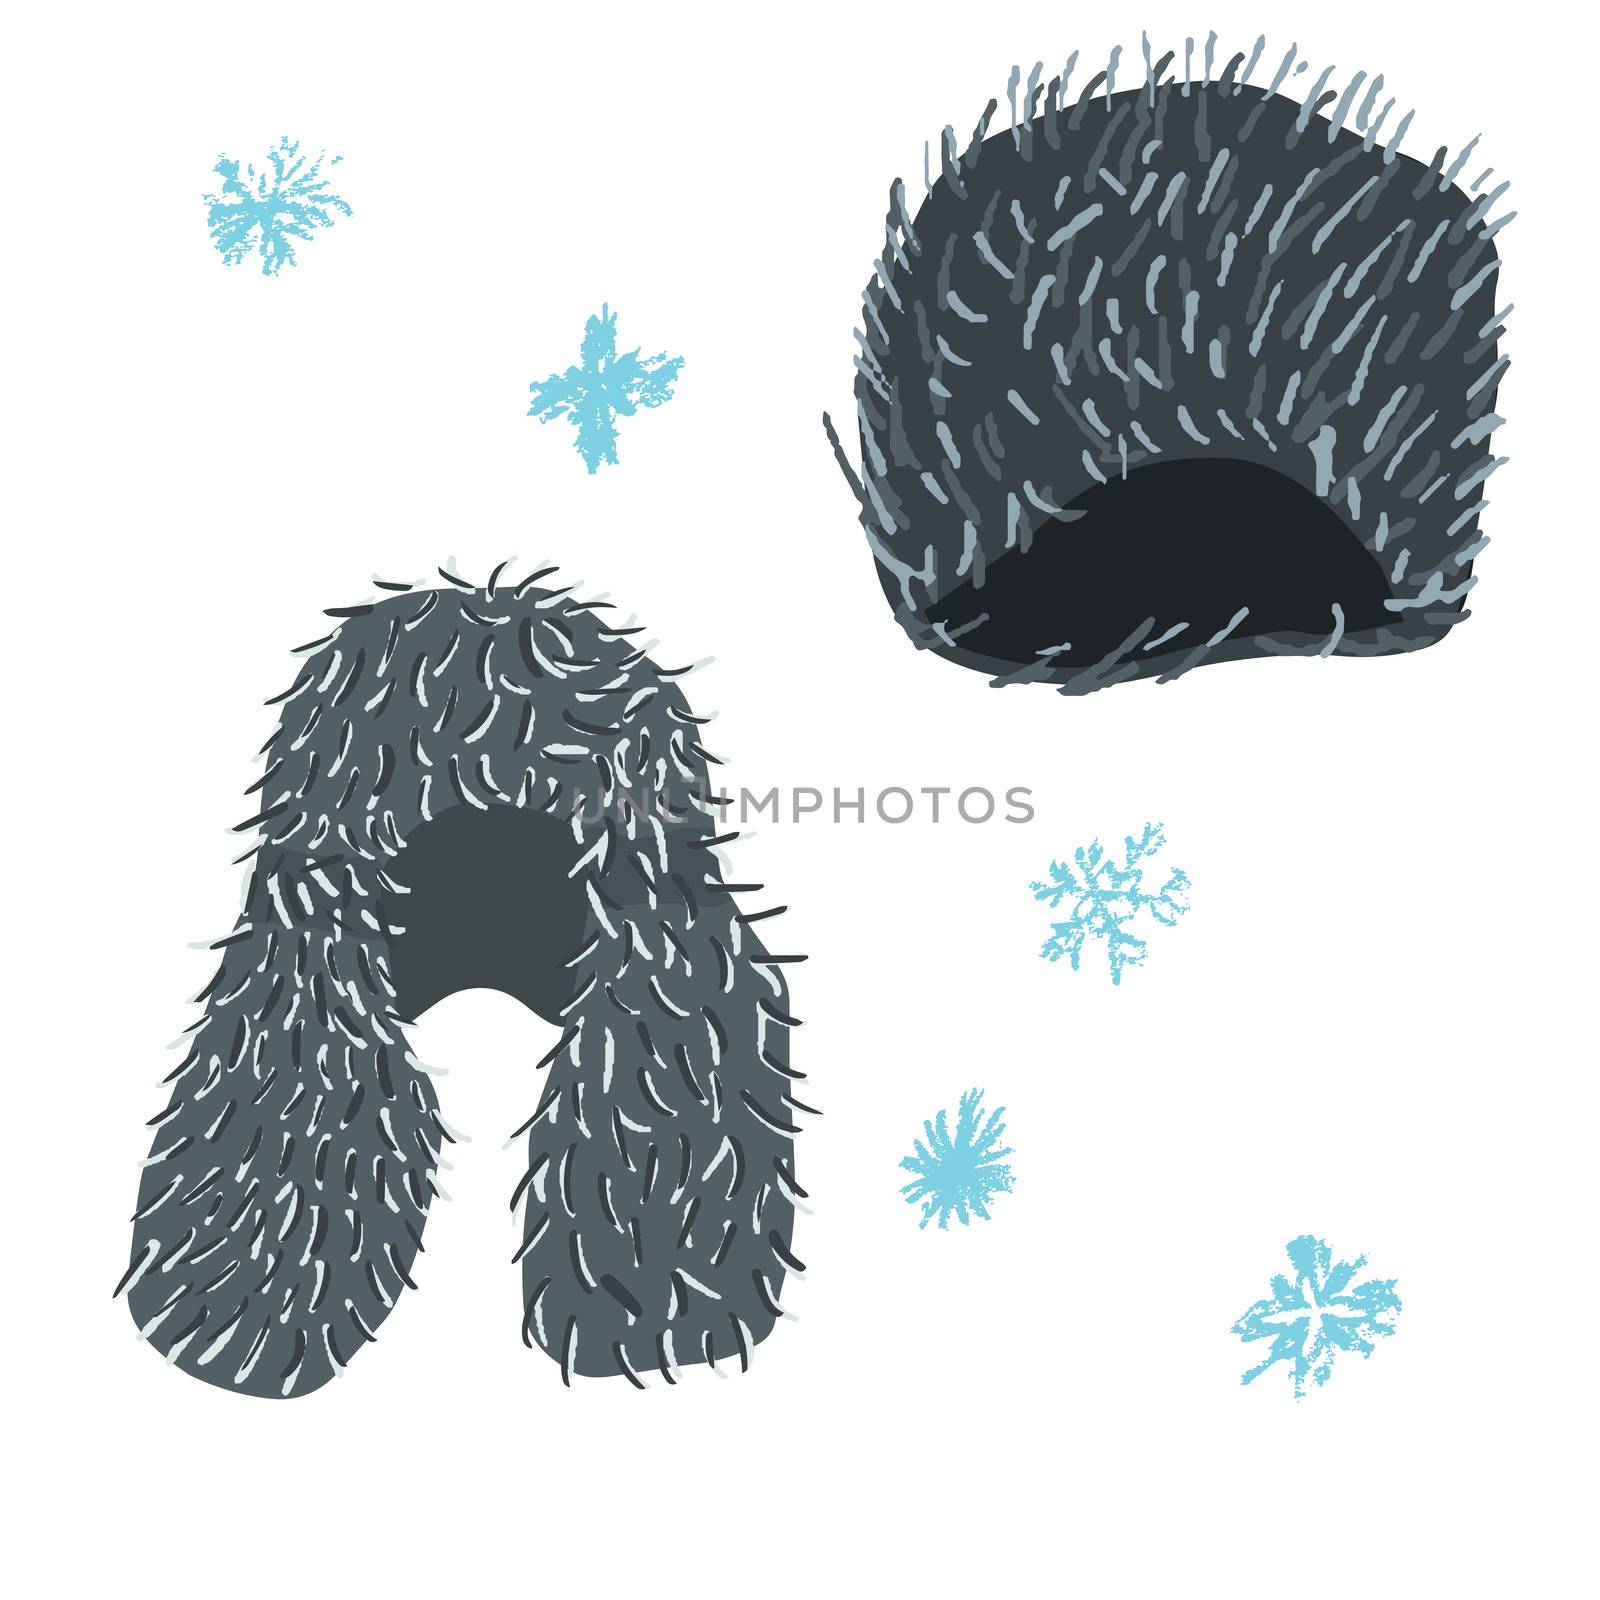 Winter fur hats. illustration of faux fur hats isolated on white background. Poster design element.